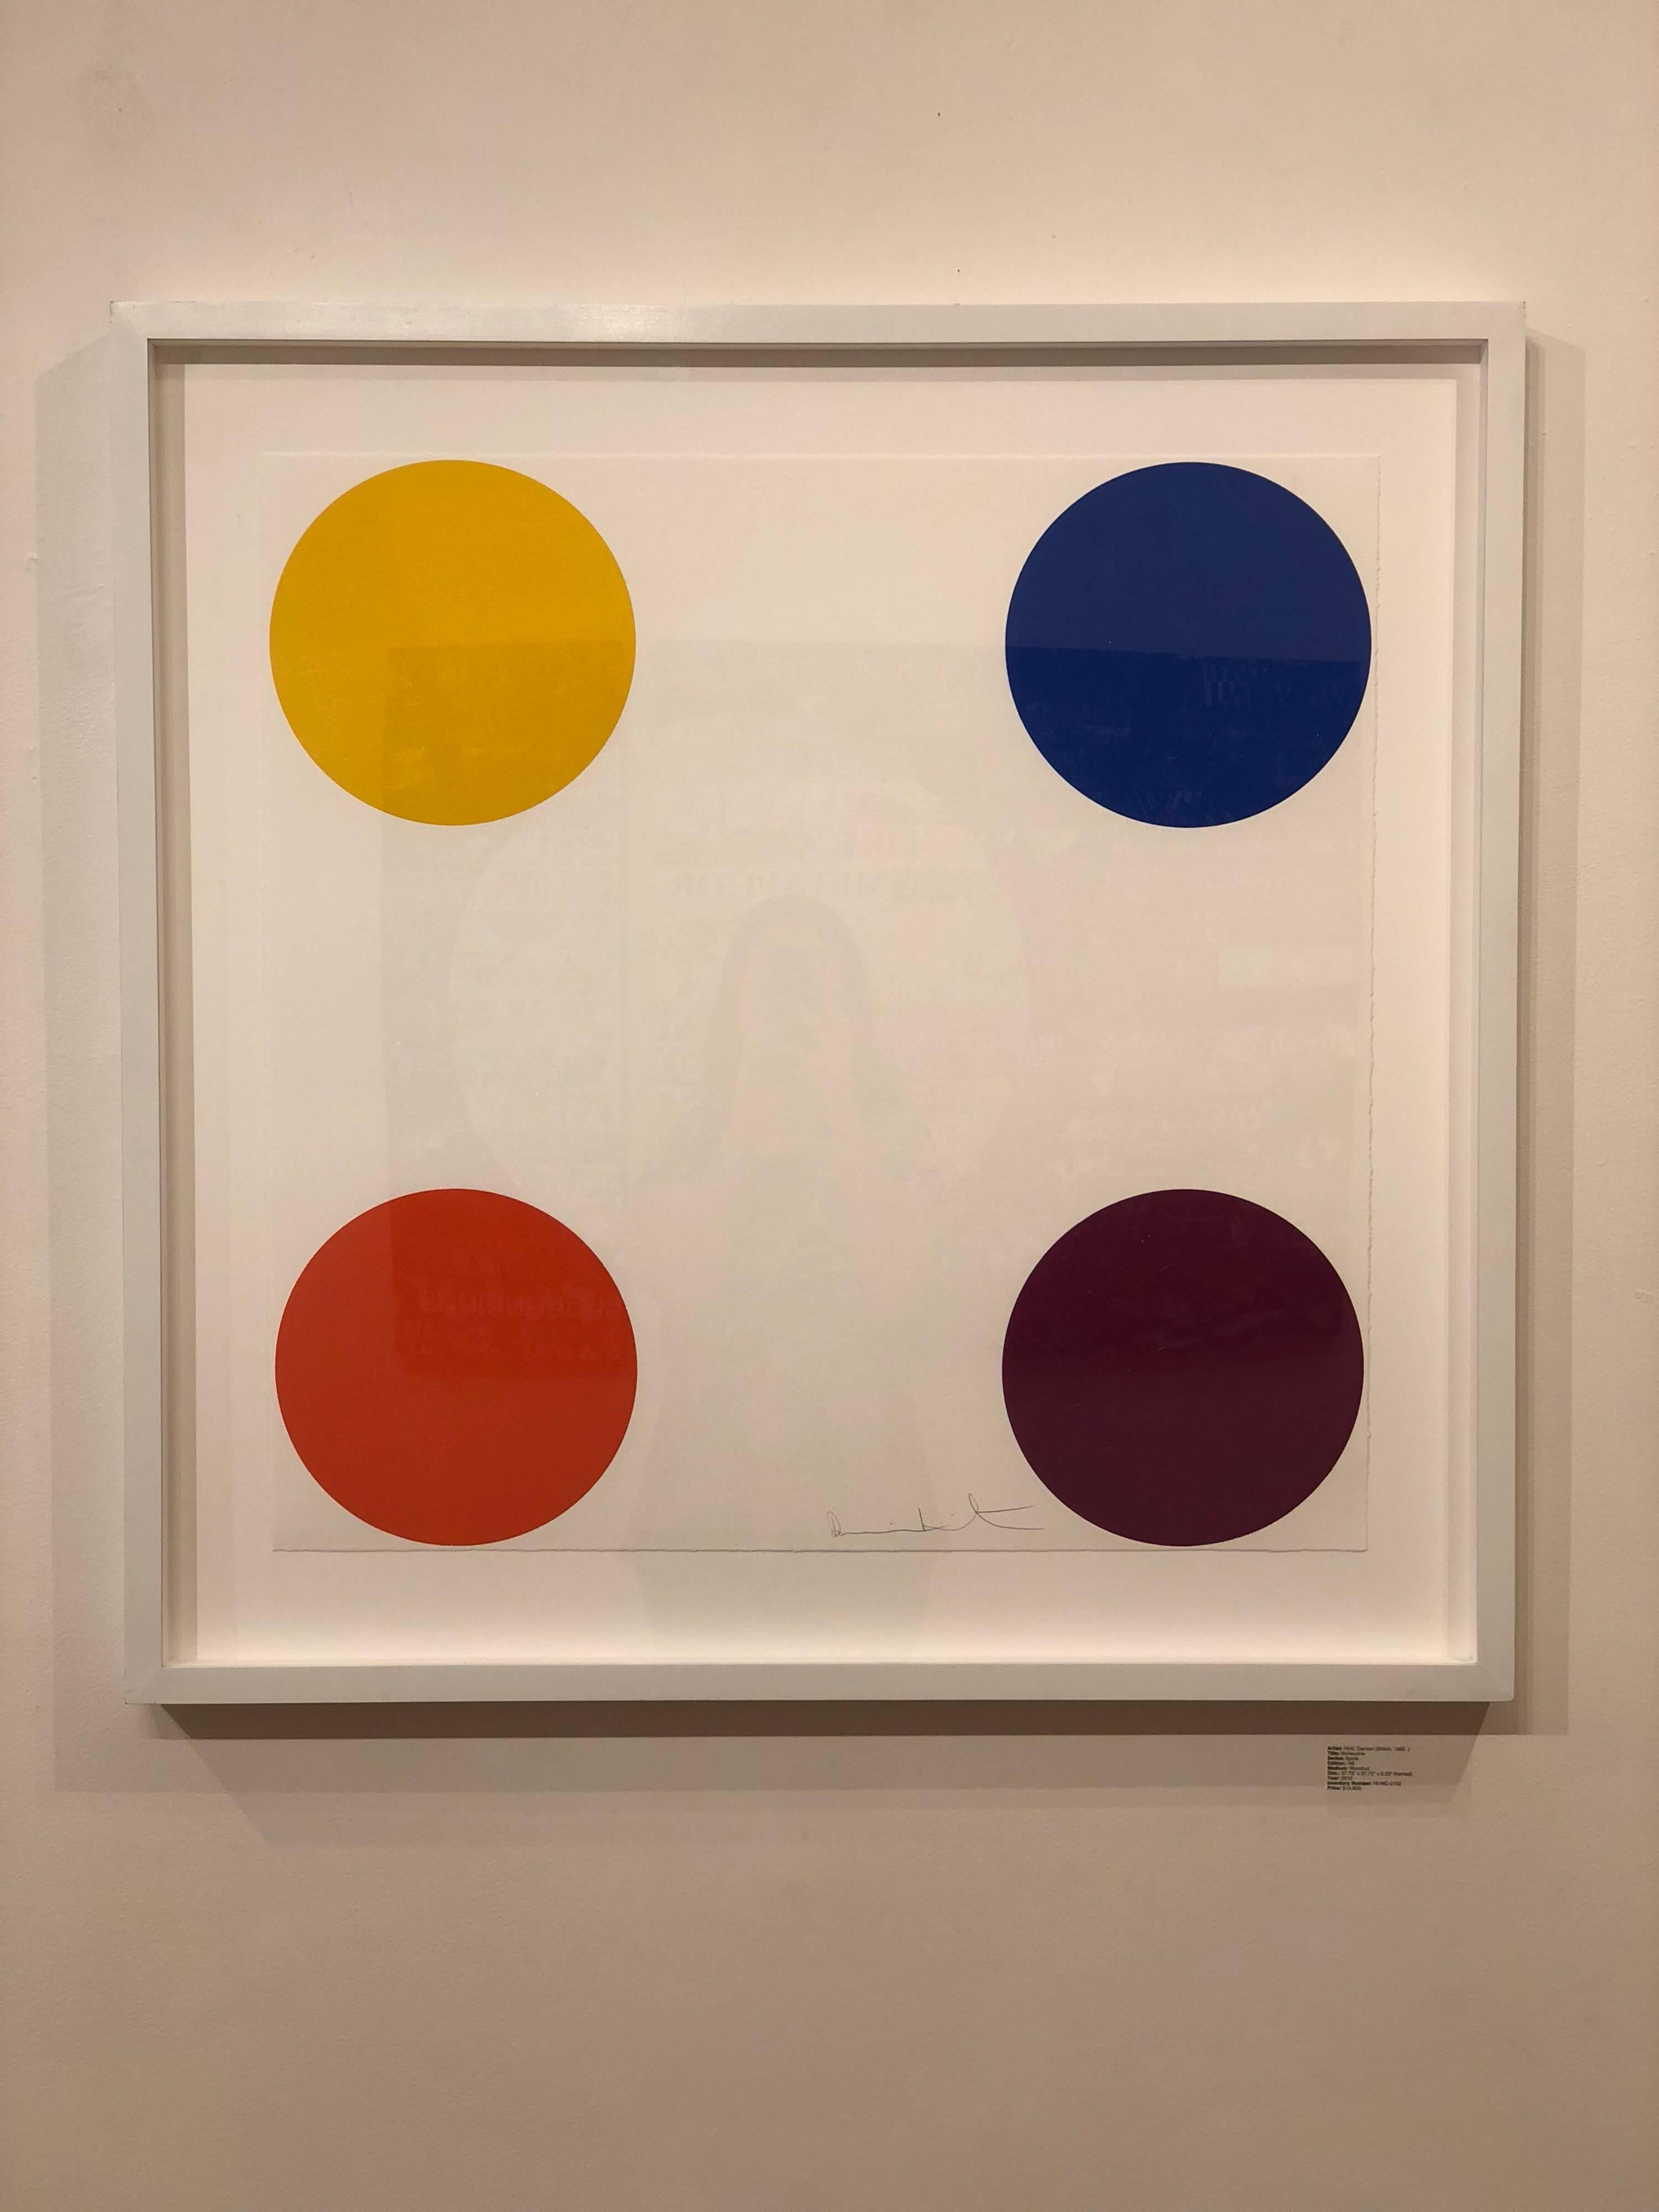 Norleucine - Contemporary Print by Damien Hirst